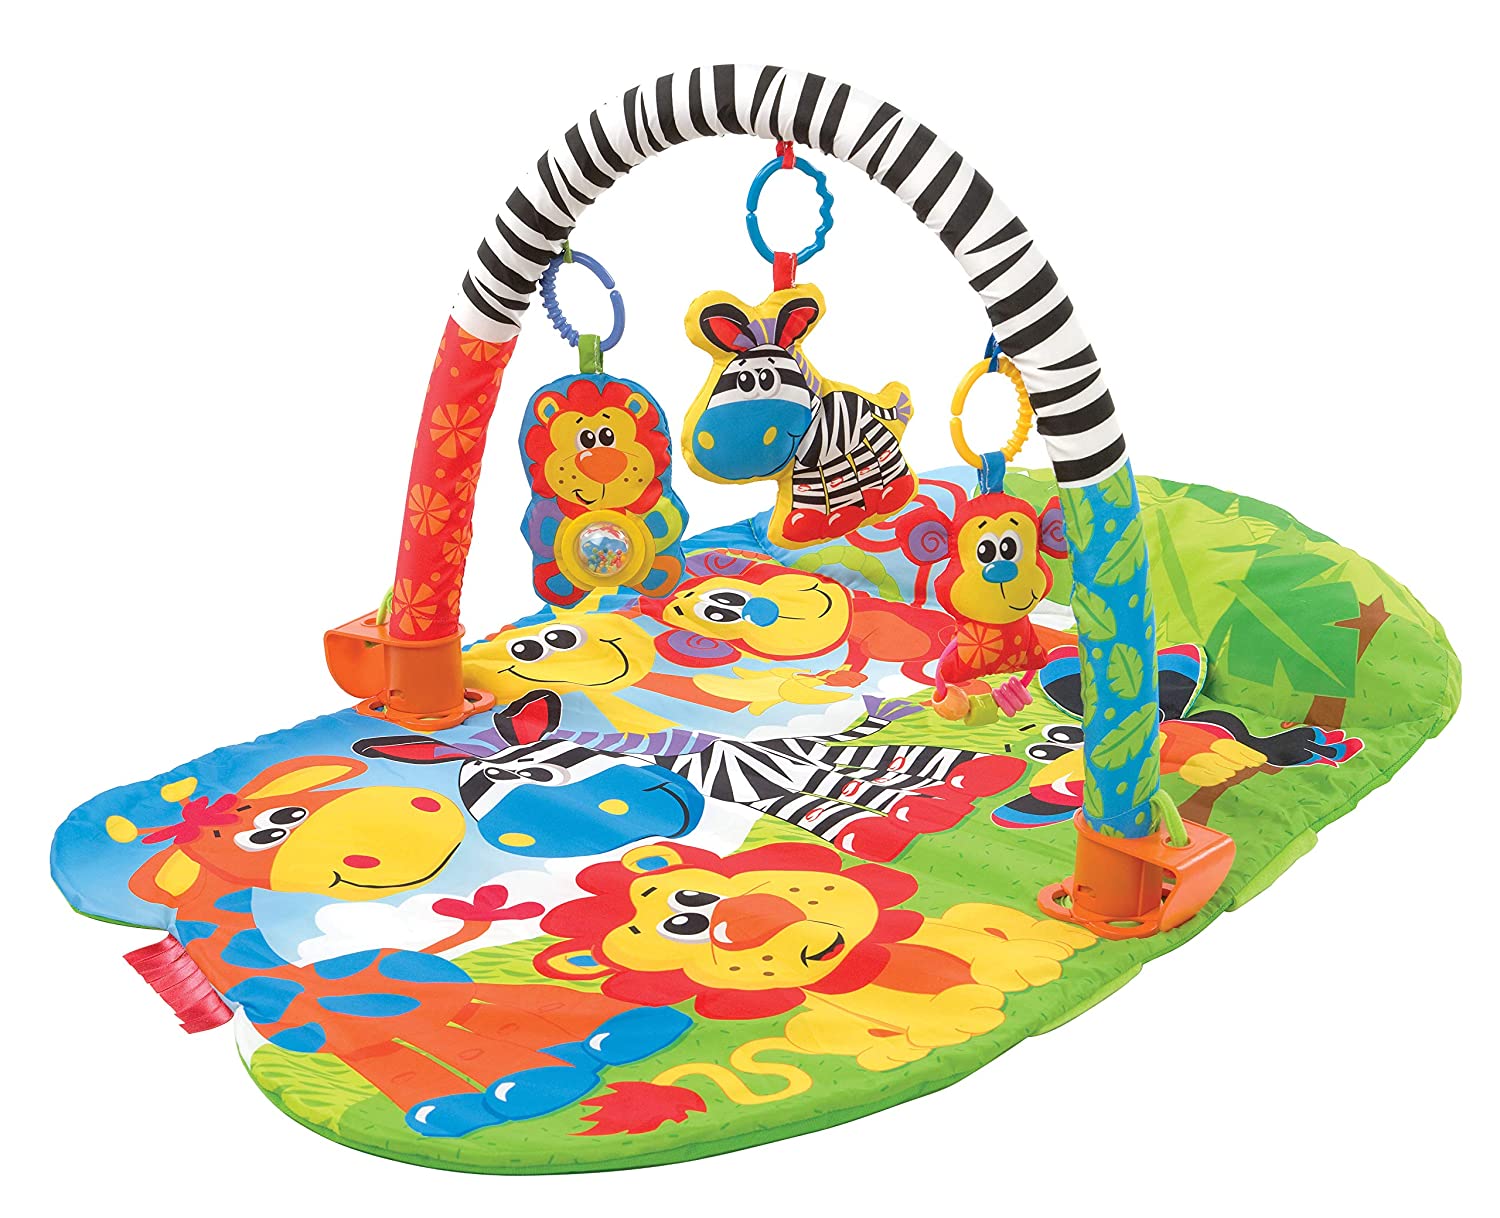 Playgro 40108 Crawling Blanket with Play Arch with Removable Toy from 0 Months Safari Super Gym Colourful